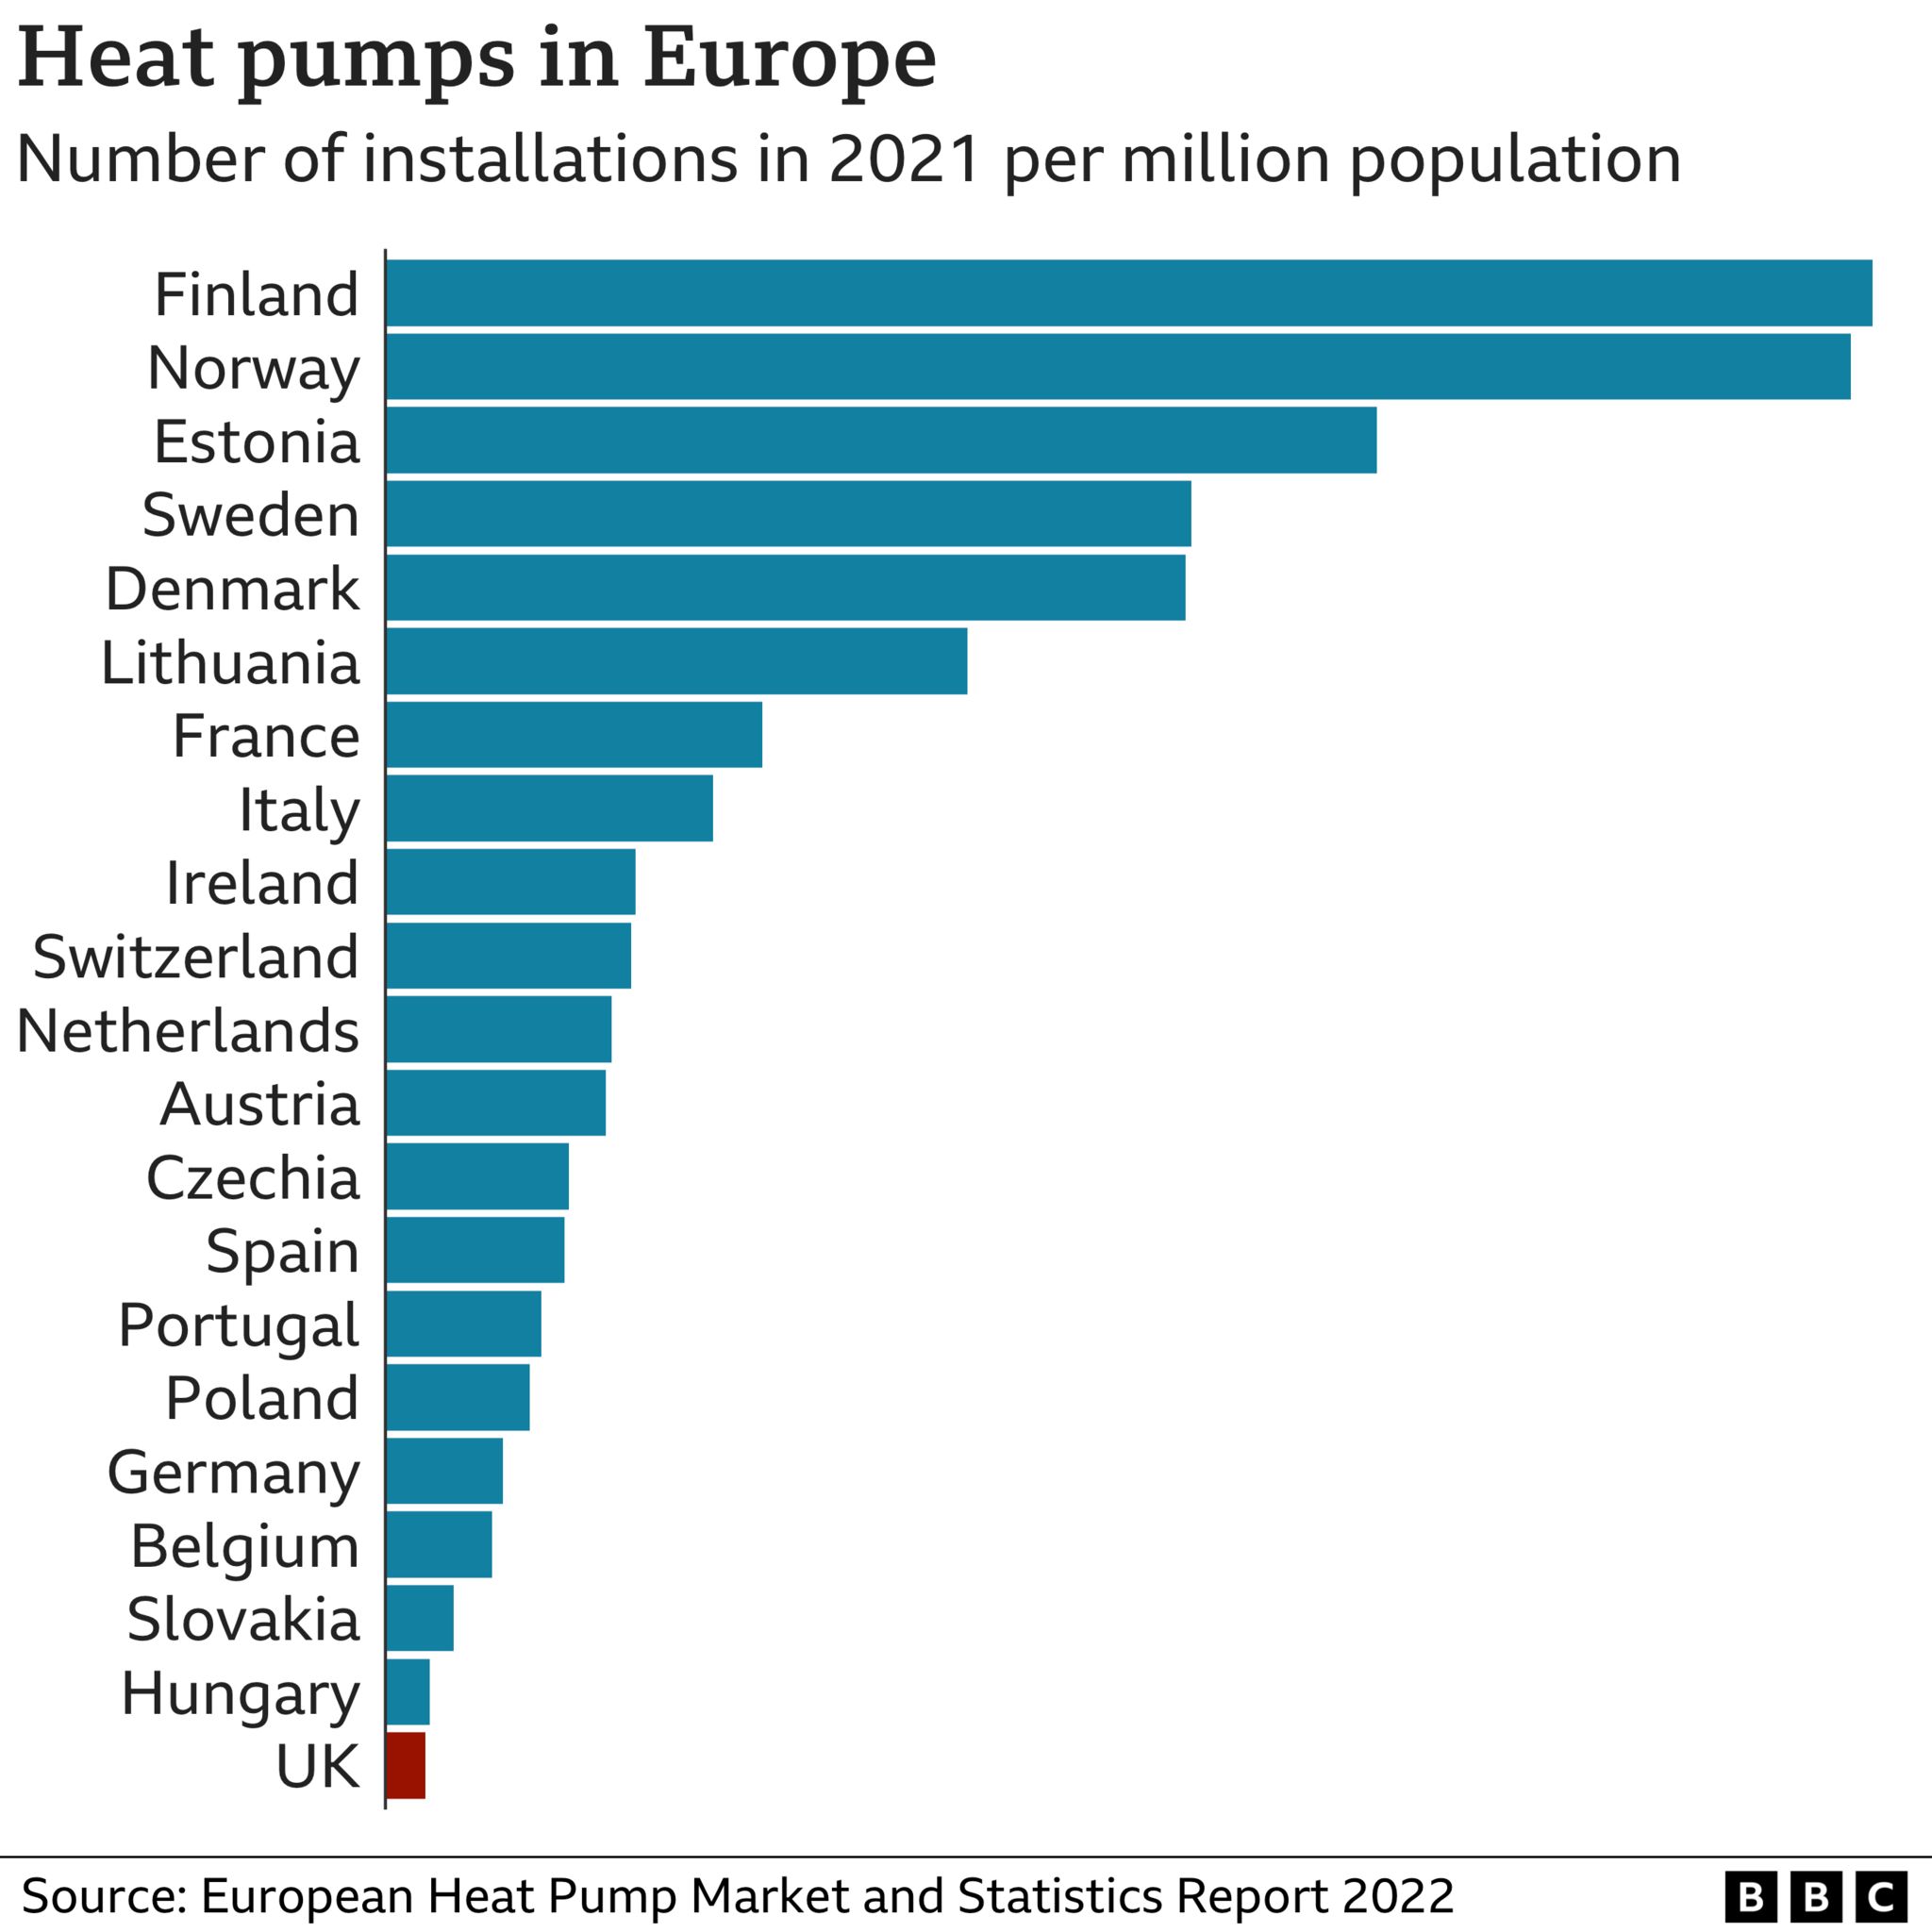 Graph showing the UK as the lowest of 21 countries in Europe by heat pump installations per million population